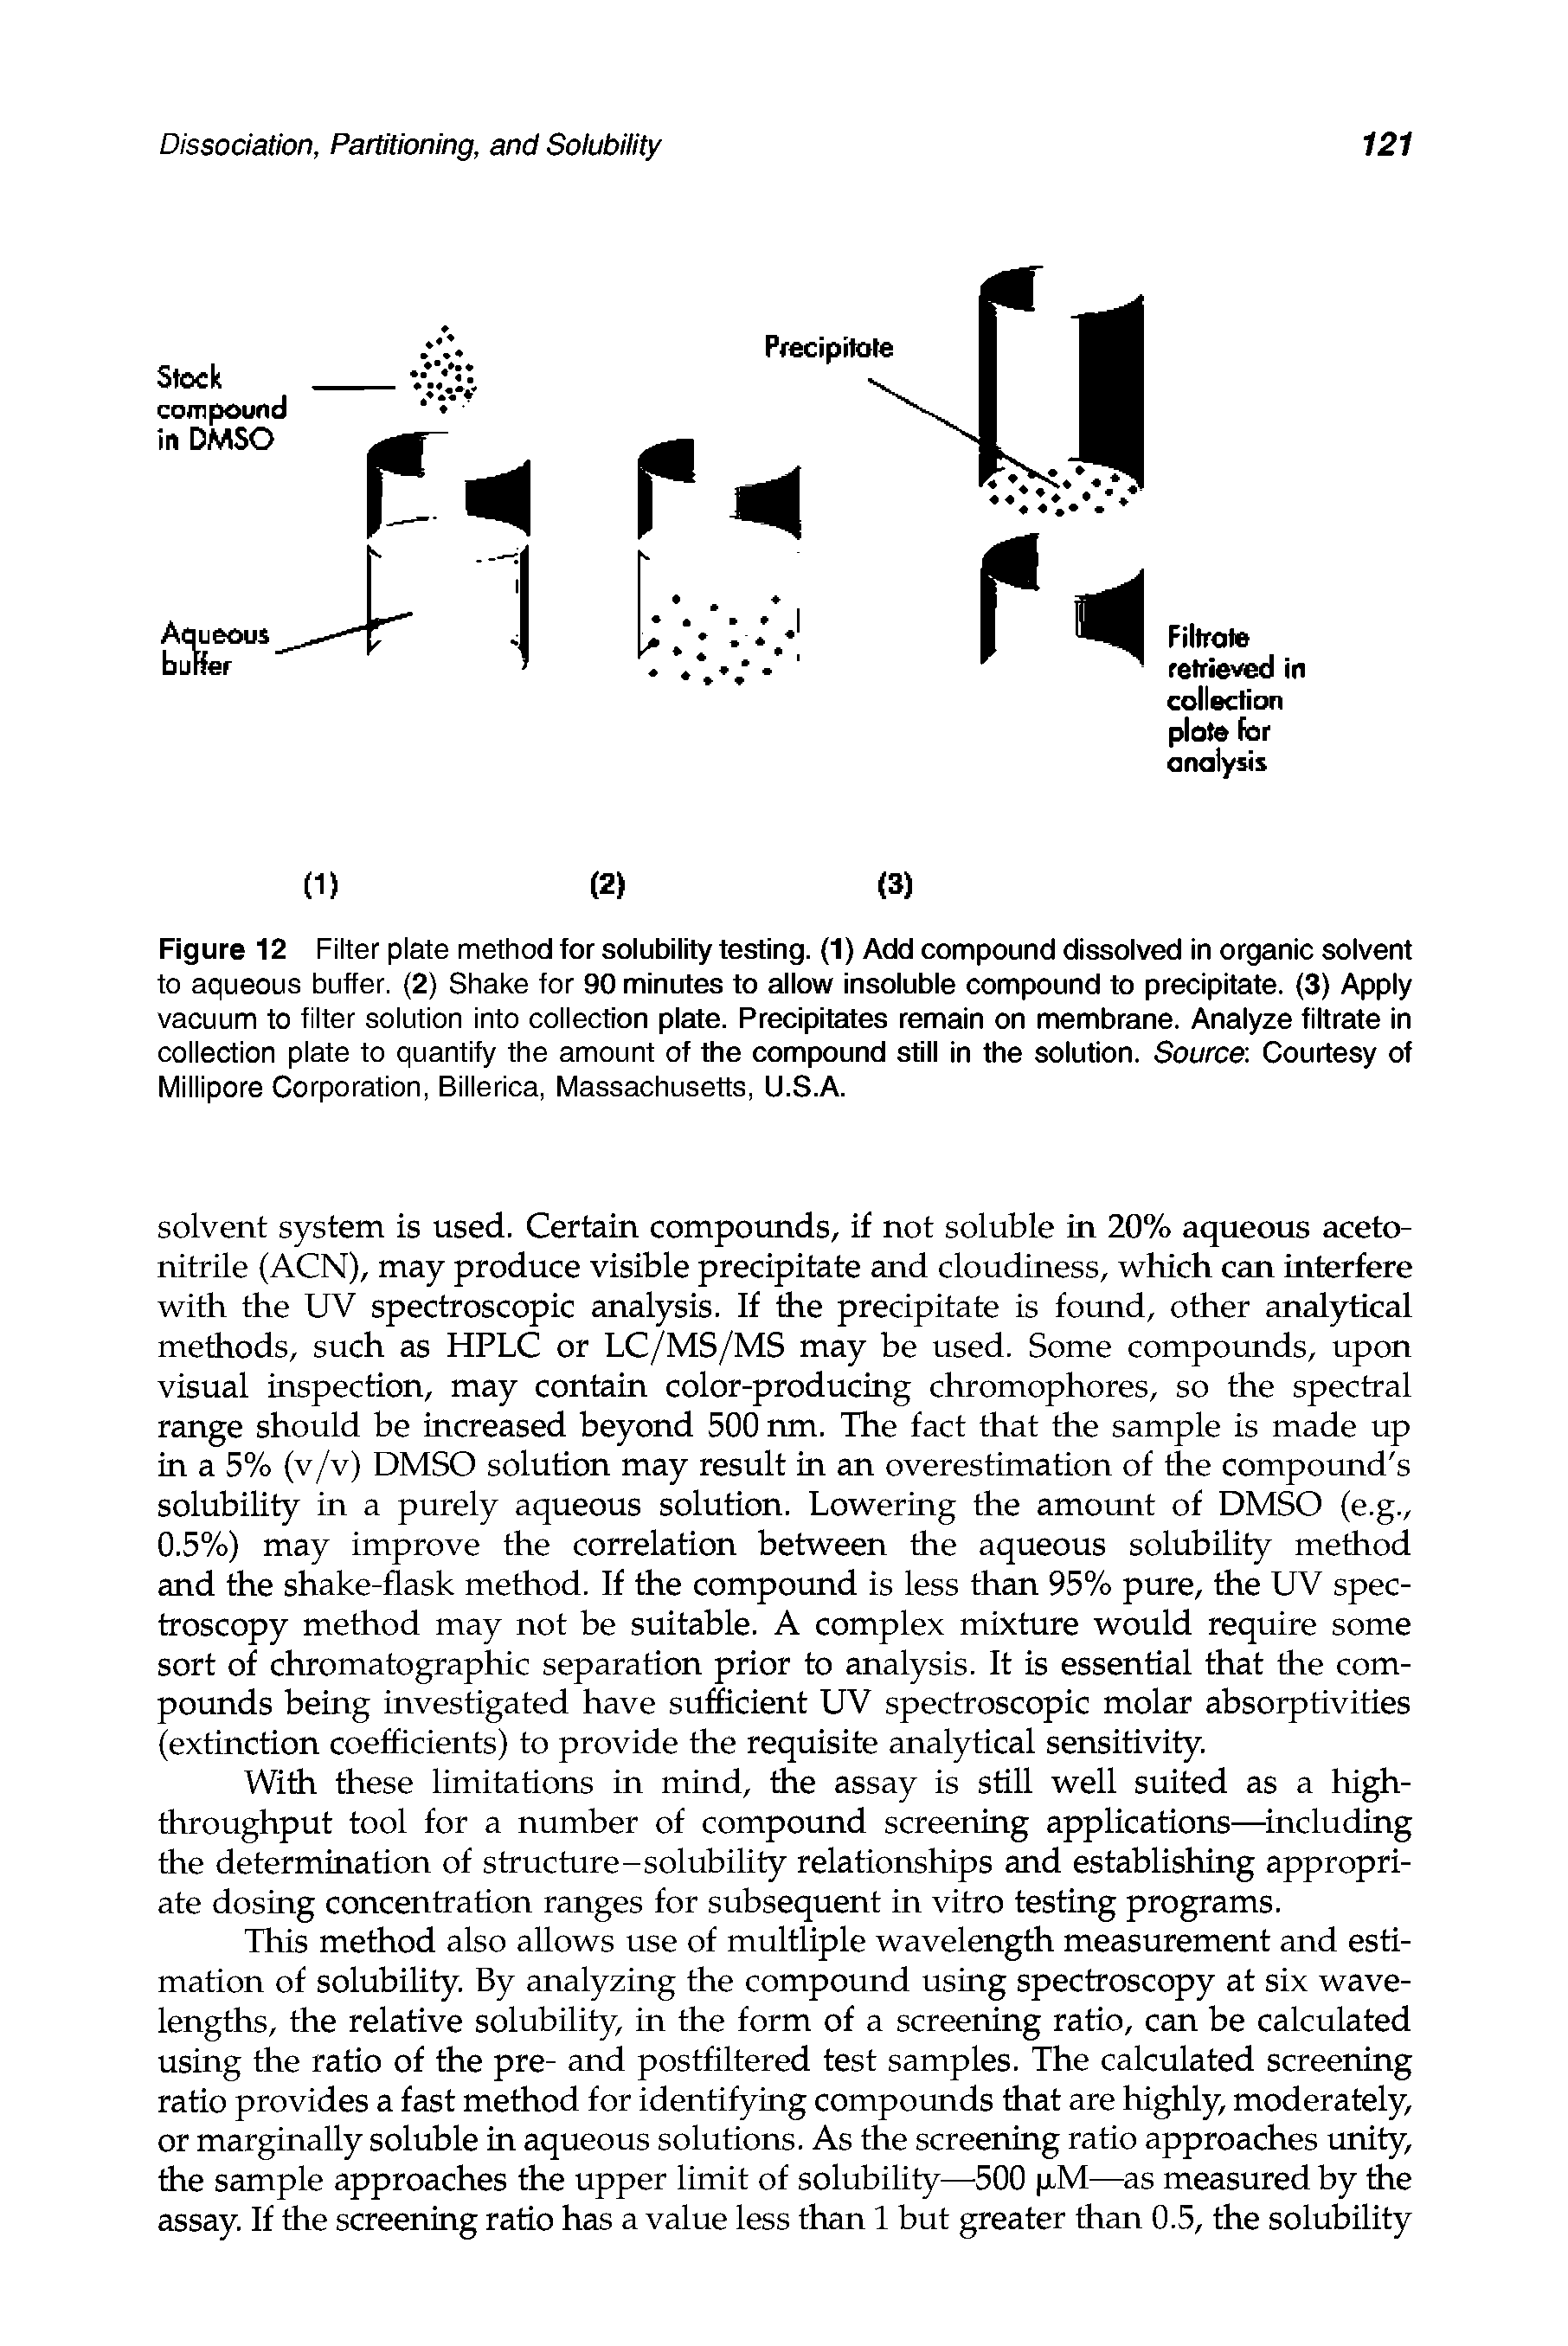 Figure 12 Filter plate method for solubility testing. (1) Add compound dissolved in organic solvent to aqueous buffer. (2) Shake for 90 minutes to allow insoluble compound to precipitate. (3) Apply vacuum to filter solution into collection plate. Precipitates remain on membrane. Analyze filtrate in collection plate to quantify the amount of the compound still in the solution. Source Courtesy of Millipore Corporation, Billerica, Massachusetts, U.S.A.